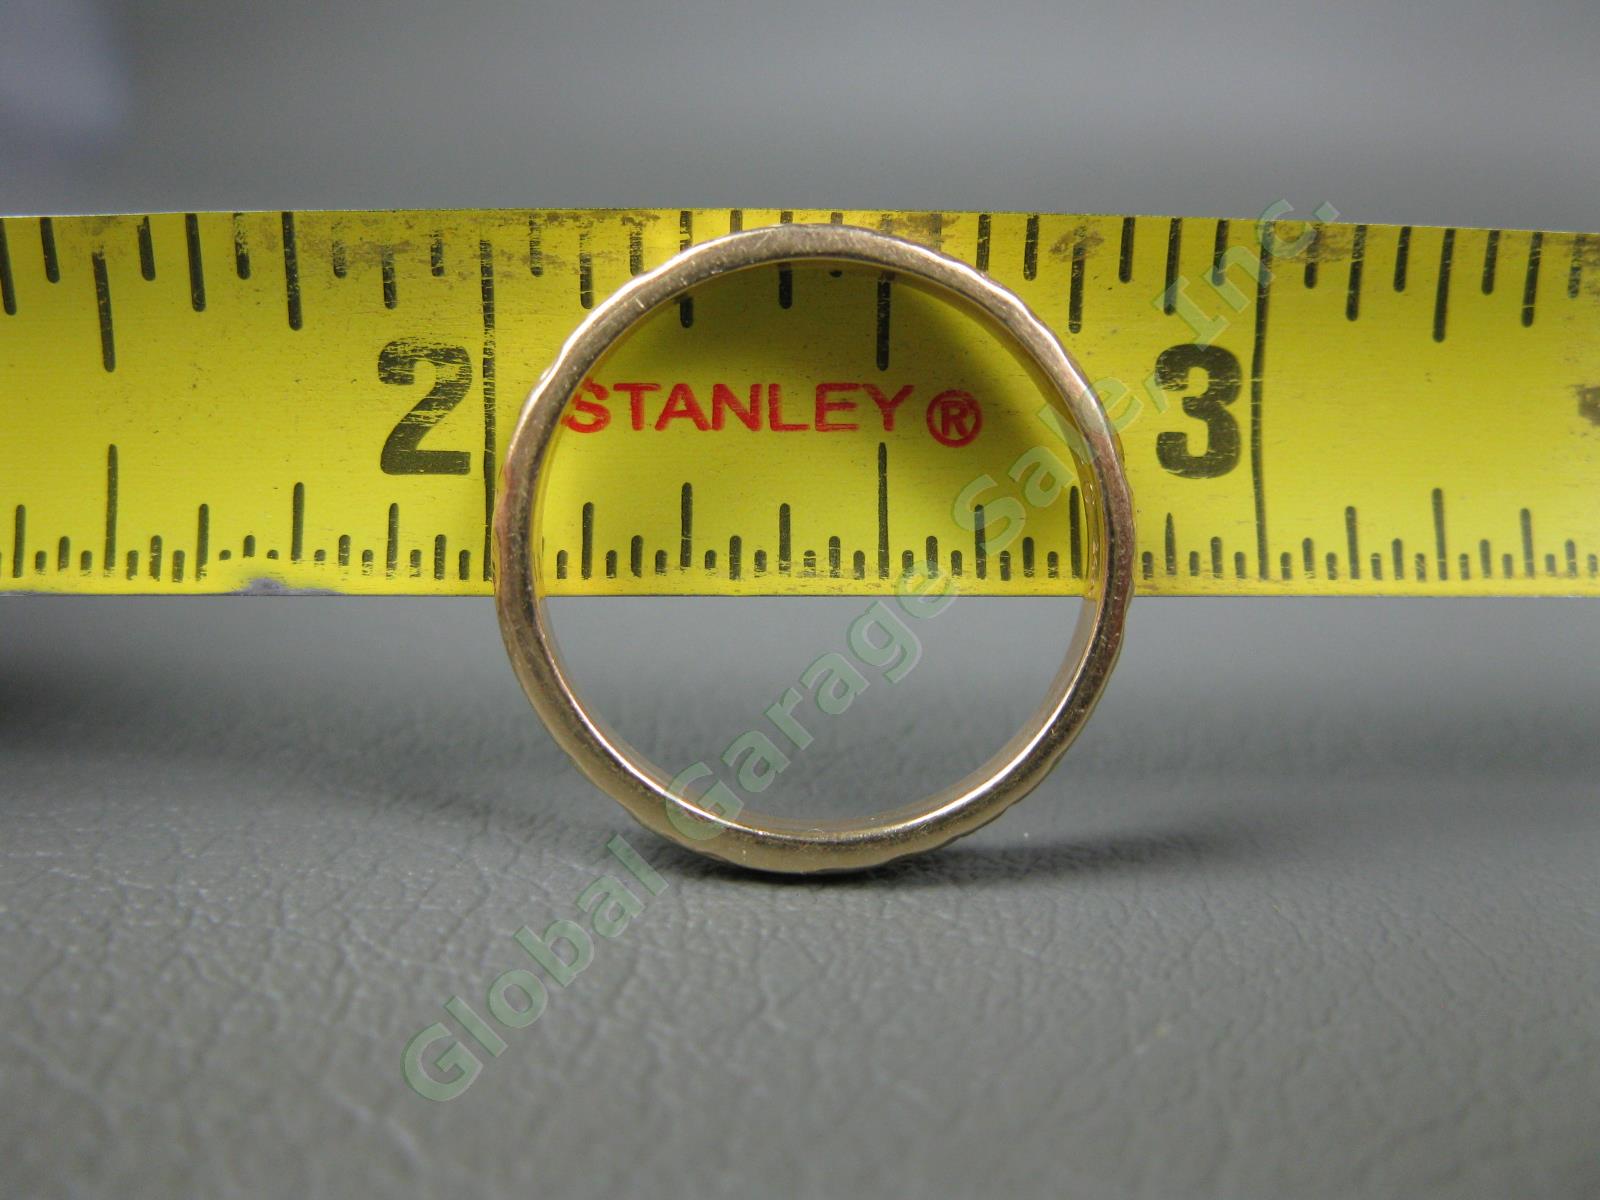 14K Solid Yellow Gold Size 7-1/4 Engraved Mens Gents Wedding Band Ring 2.6 Grams 3